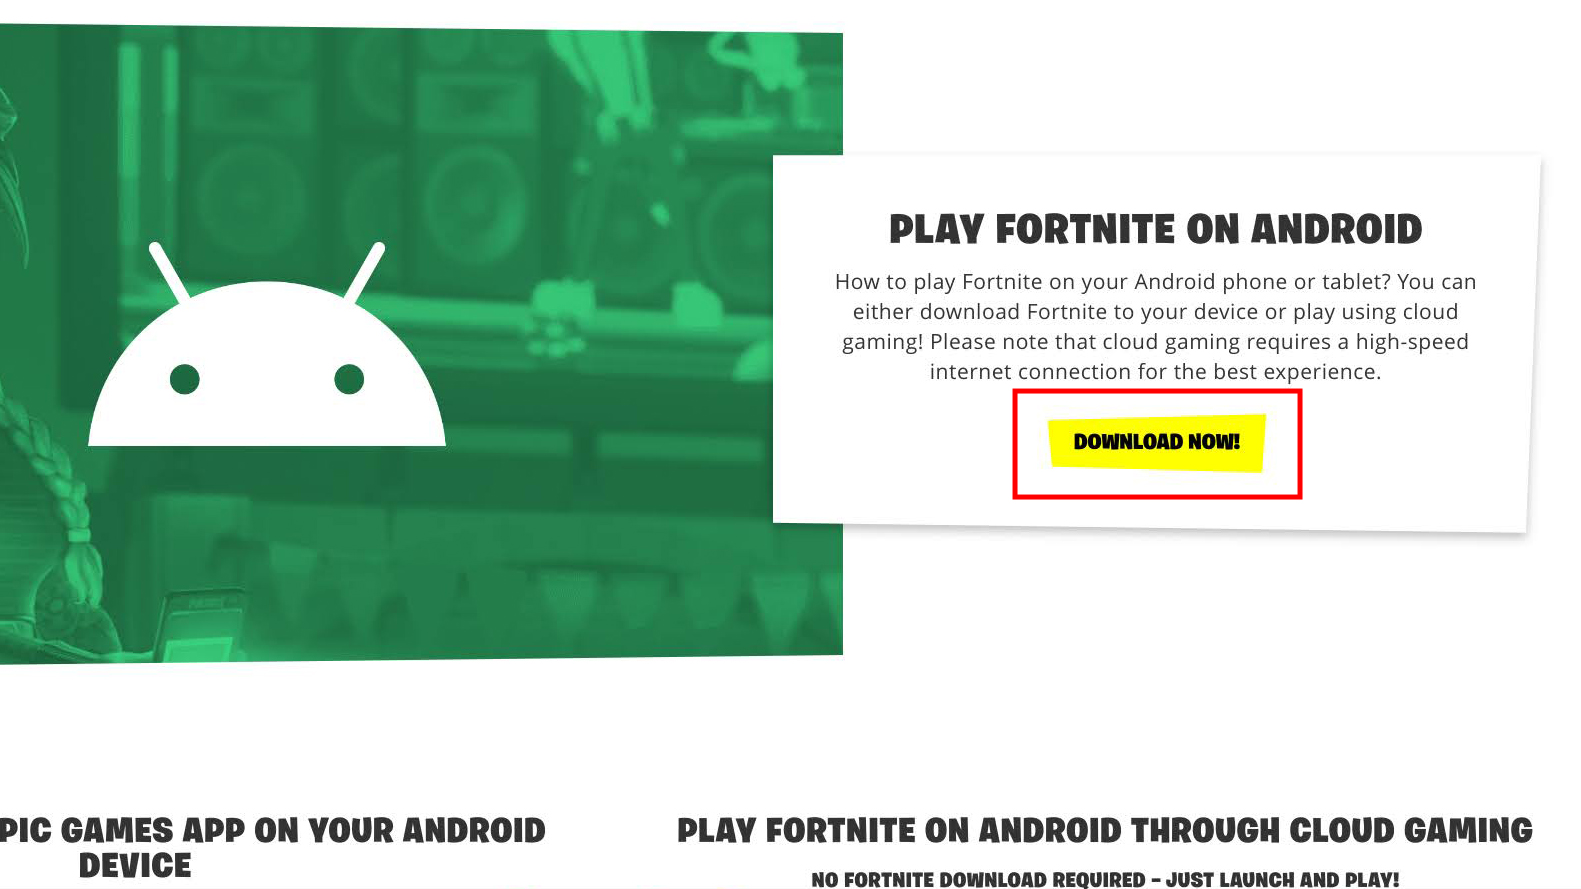 How to DOWNLOAD the Epic Games APK for FREE on your Android phone